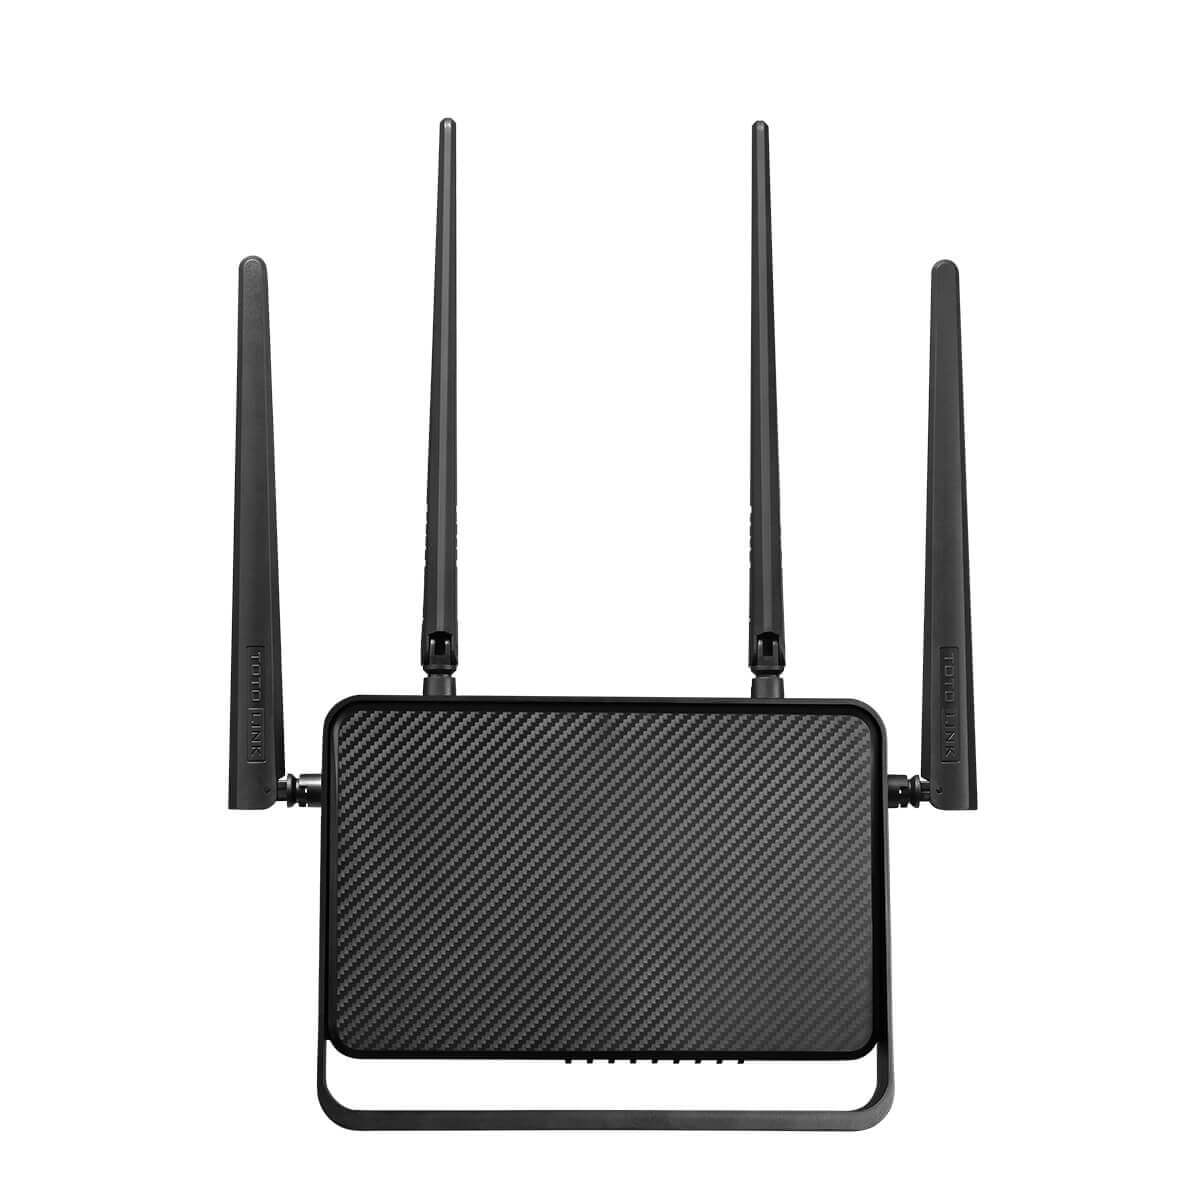 Thiết bị mạng AC1200 Wireless Dual Band Router TOTOLINK A950RG